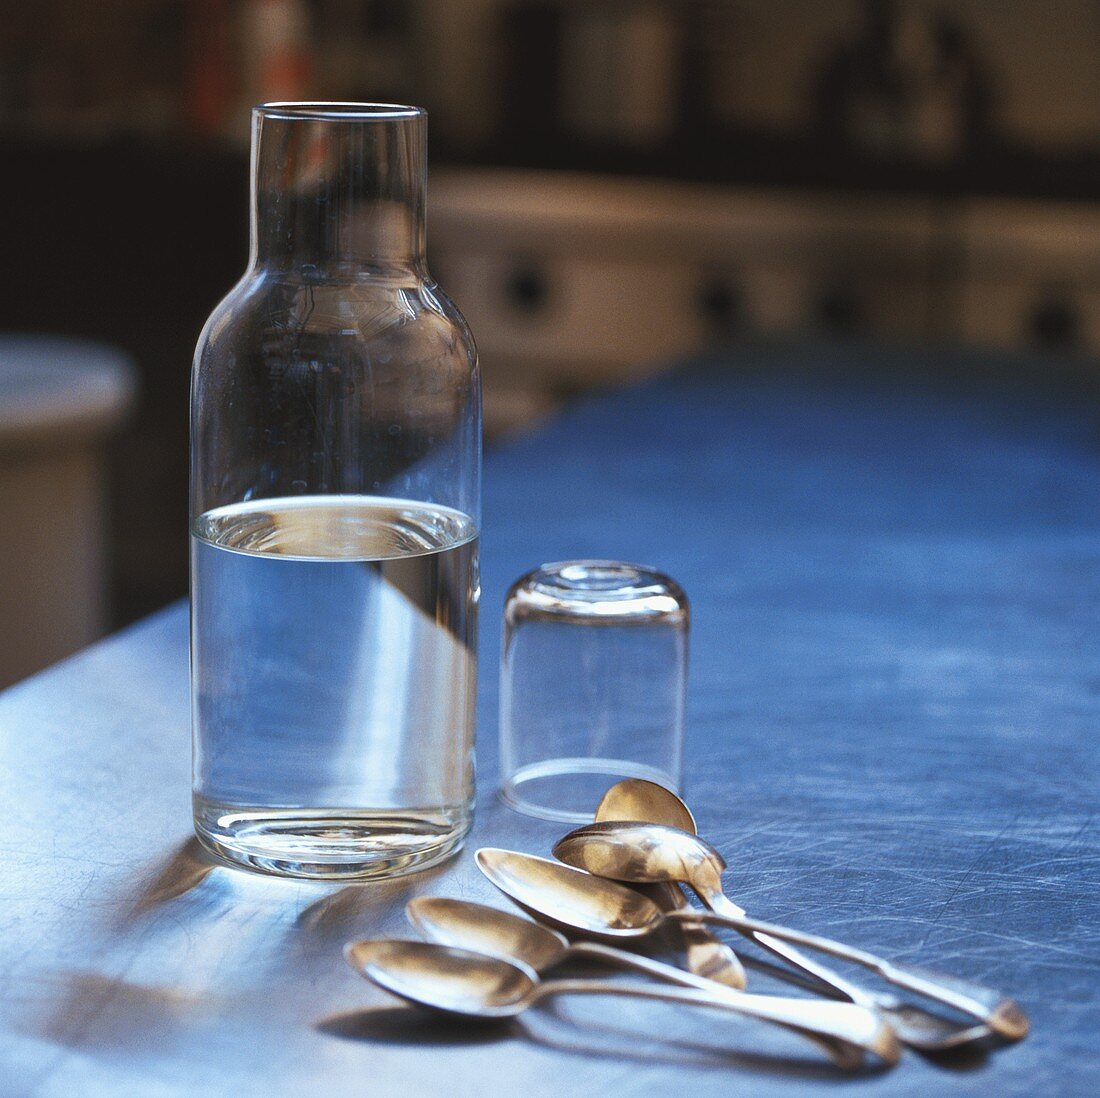 A bottle of water with glass and spoons